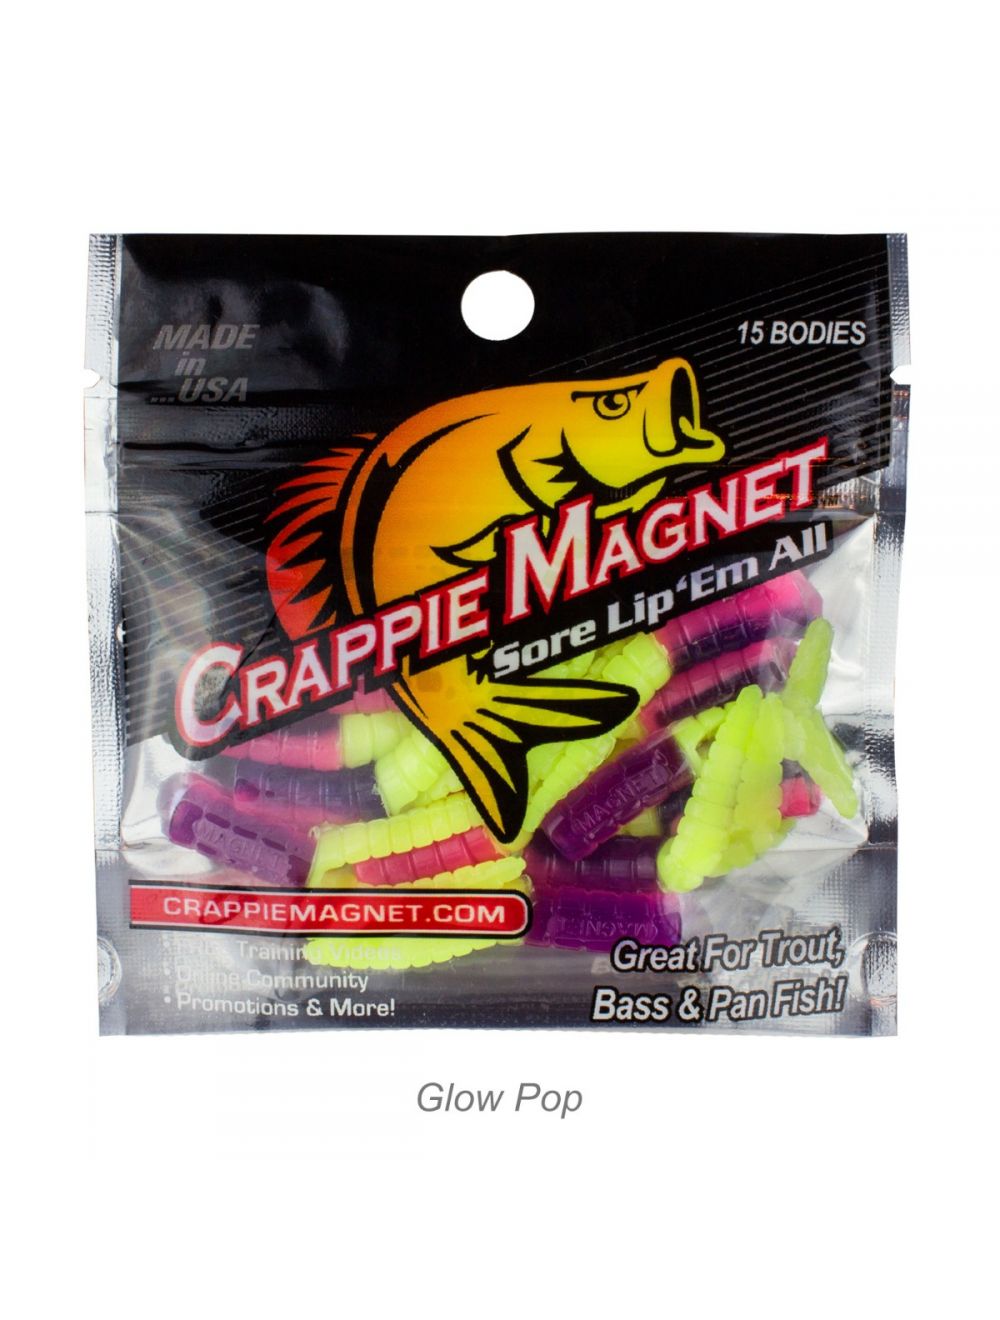 Add Glow to Catch More Crappie